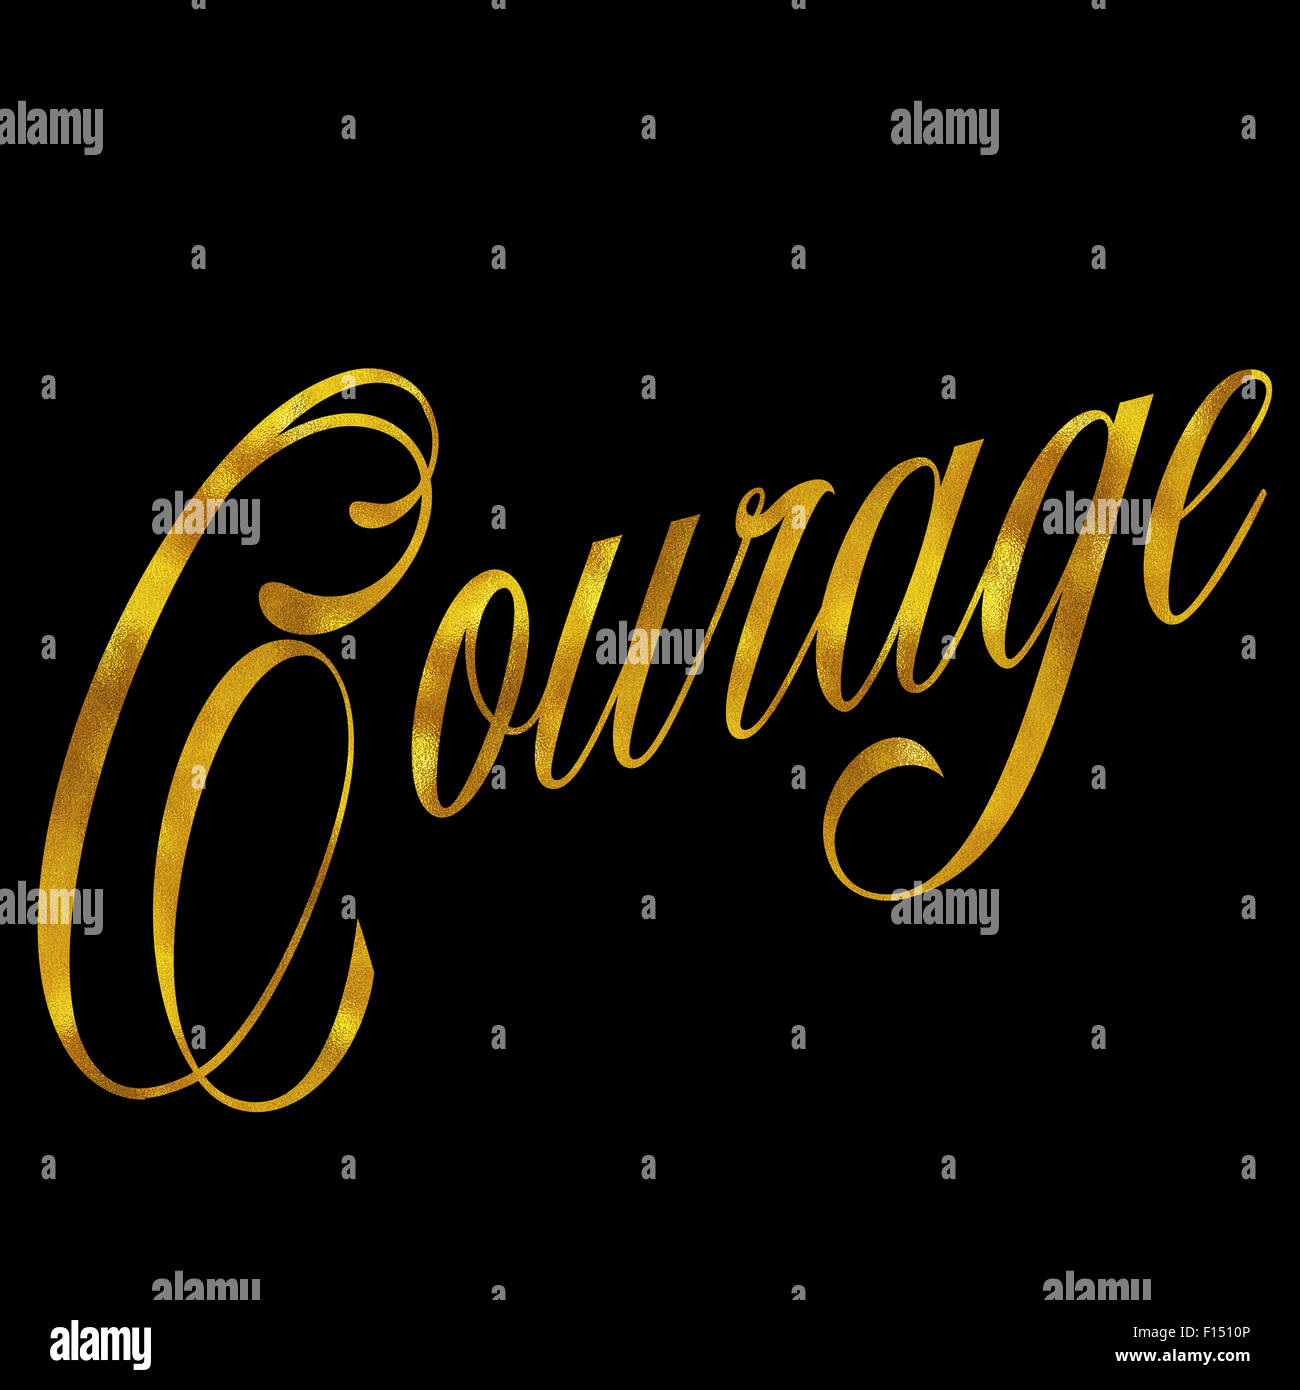 Courage Gold Faux Foil Metallic Glitter Bravery Quote Isolated on White Background Stock Photo